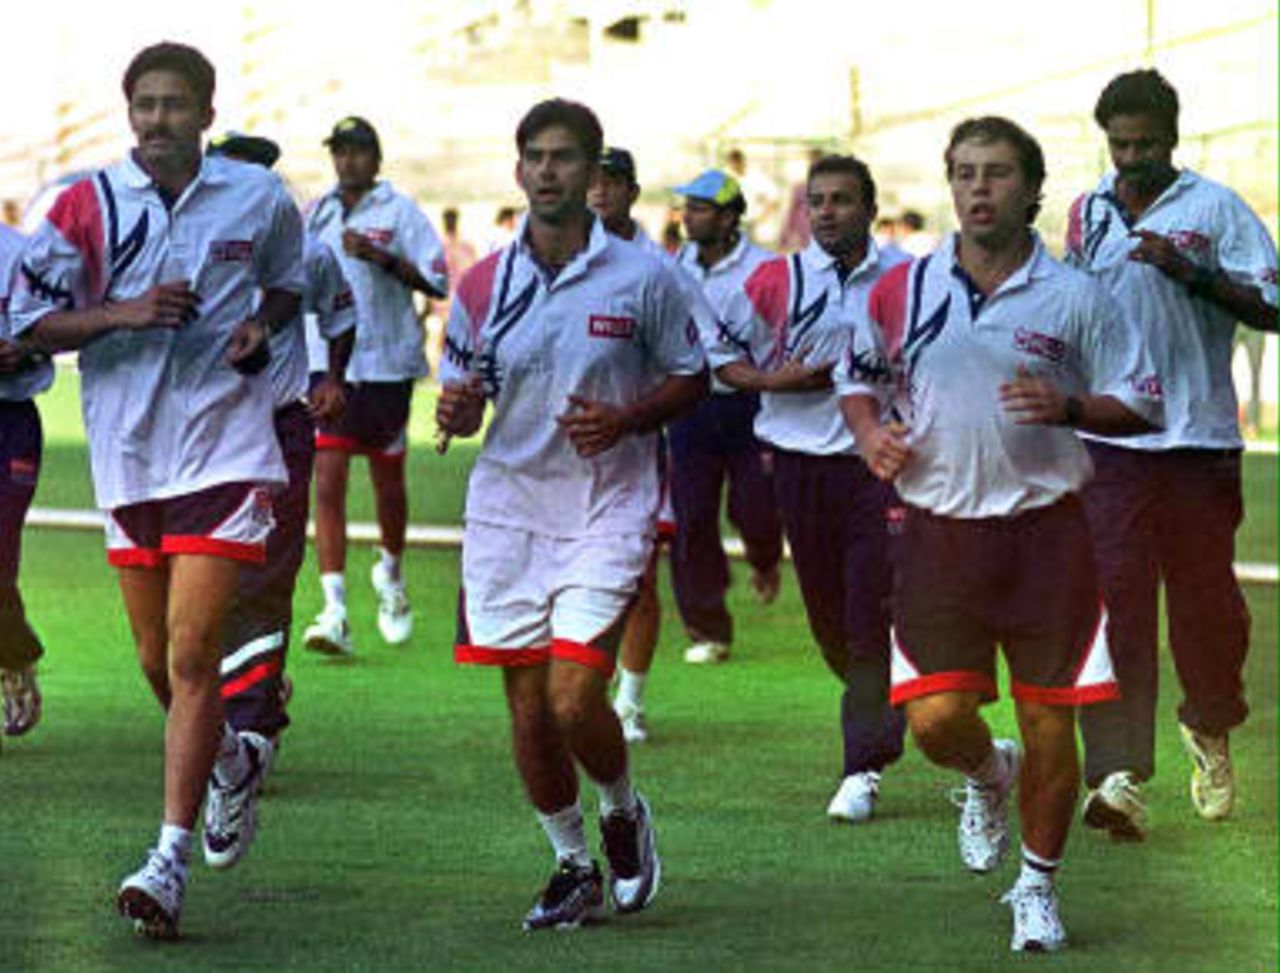 Indian cricket team players warm up before practice on 03 March 1999, in Chinaswany cricket stadium, Bangalore,  on the eve of the final of the Triangular One-day cricket series to be played between India and Pakistan.